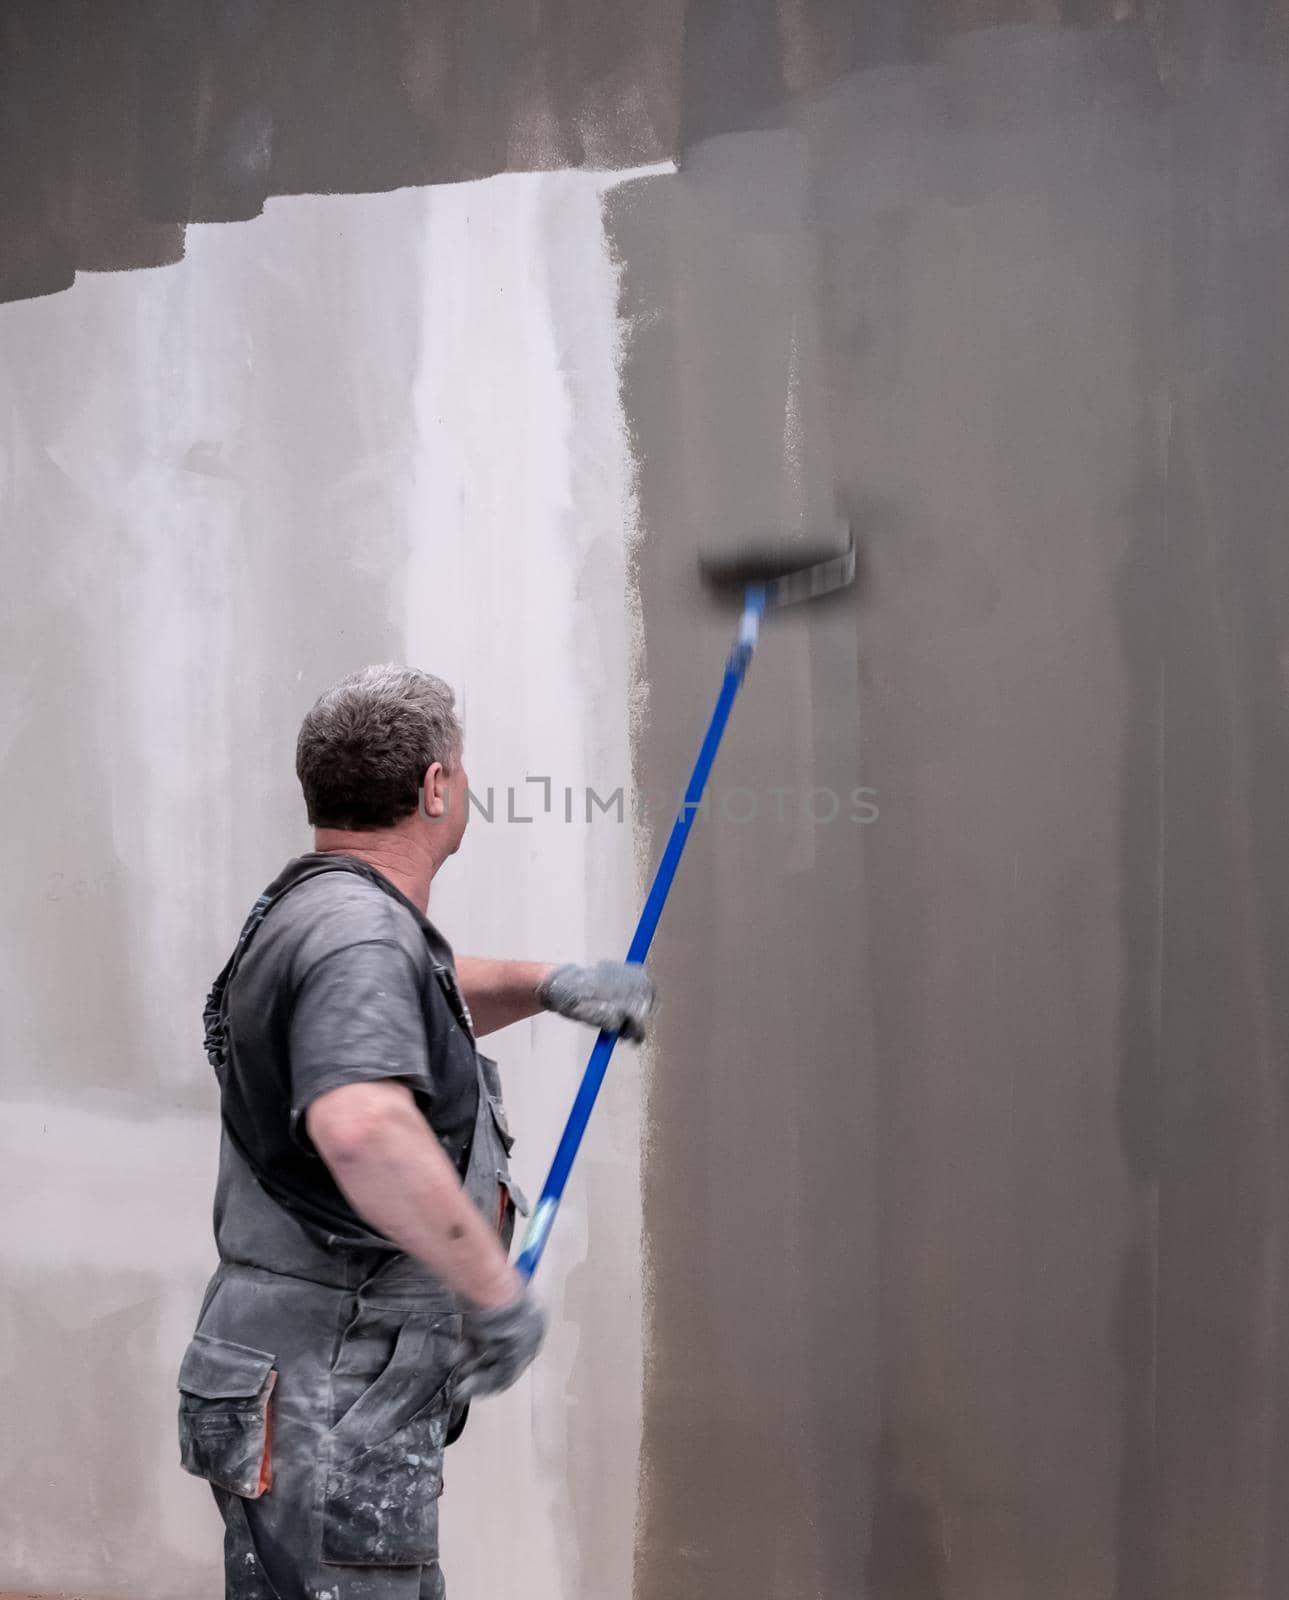 man painting wall with roller. worker paint a house wall. renovation. by igor010